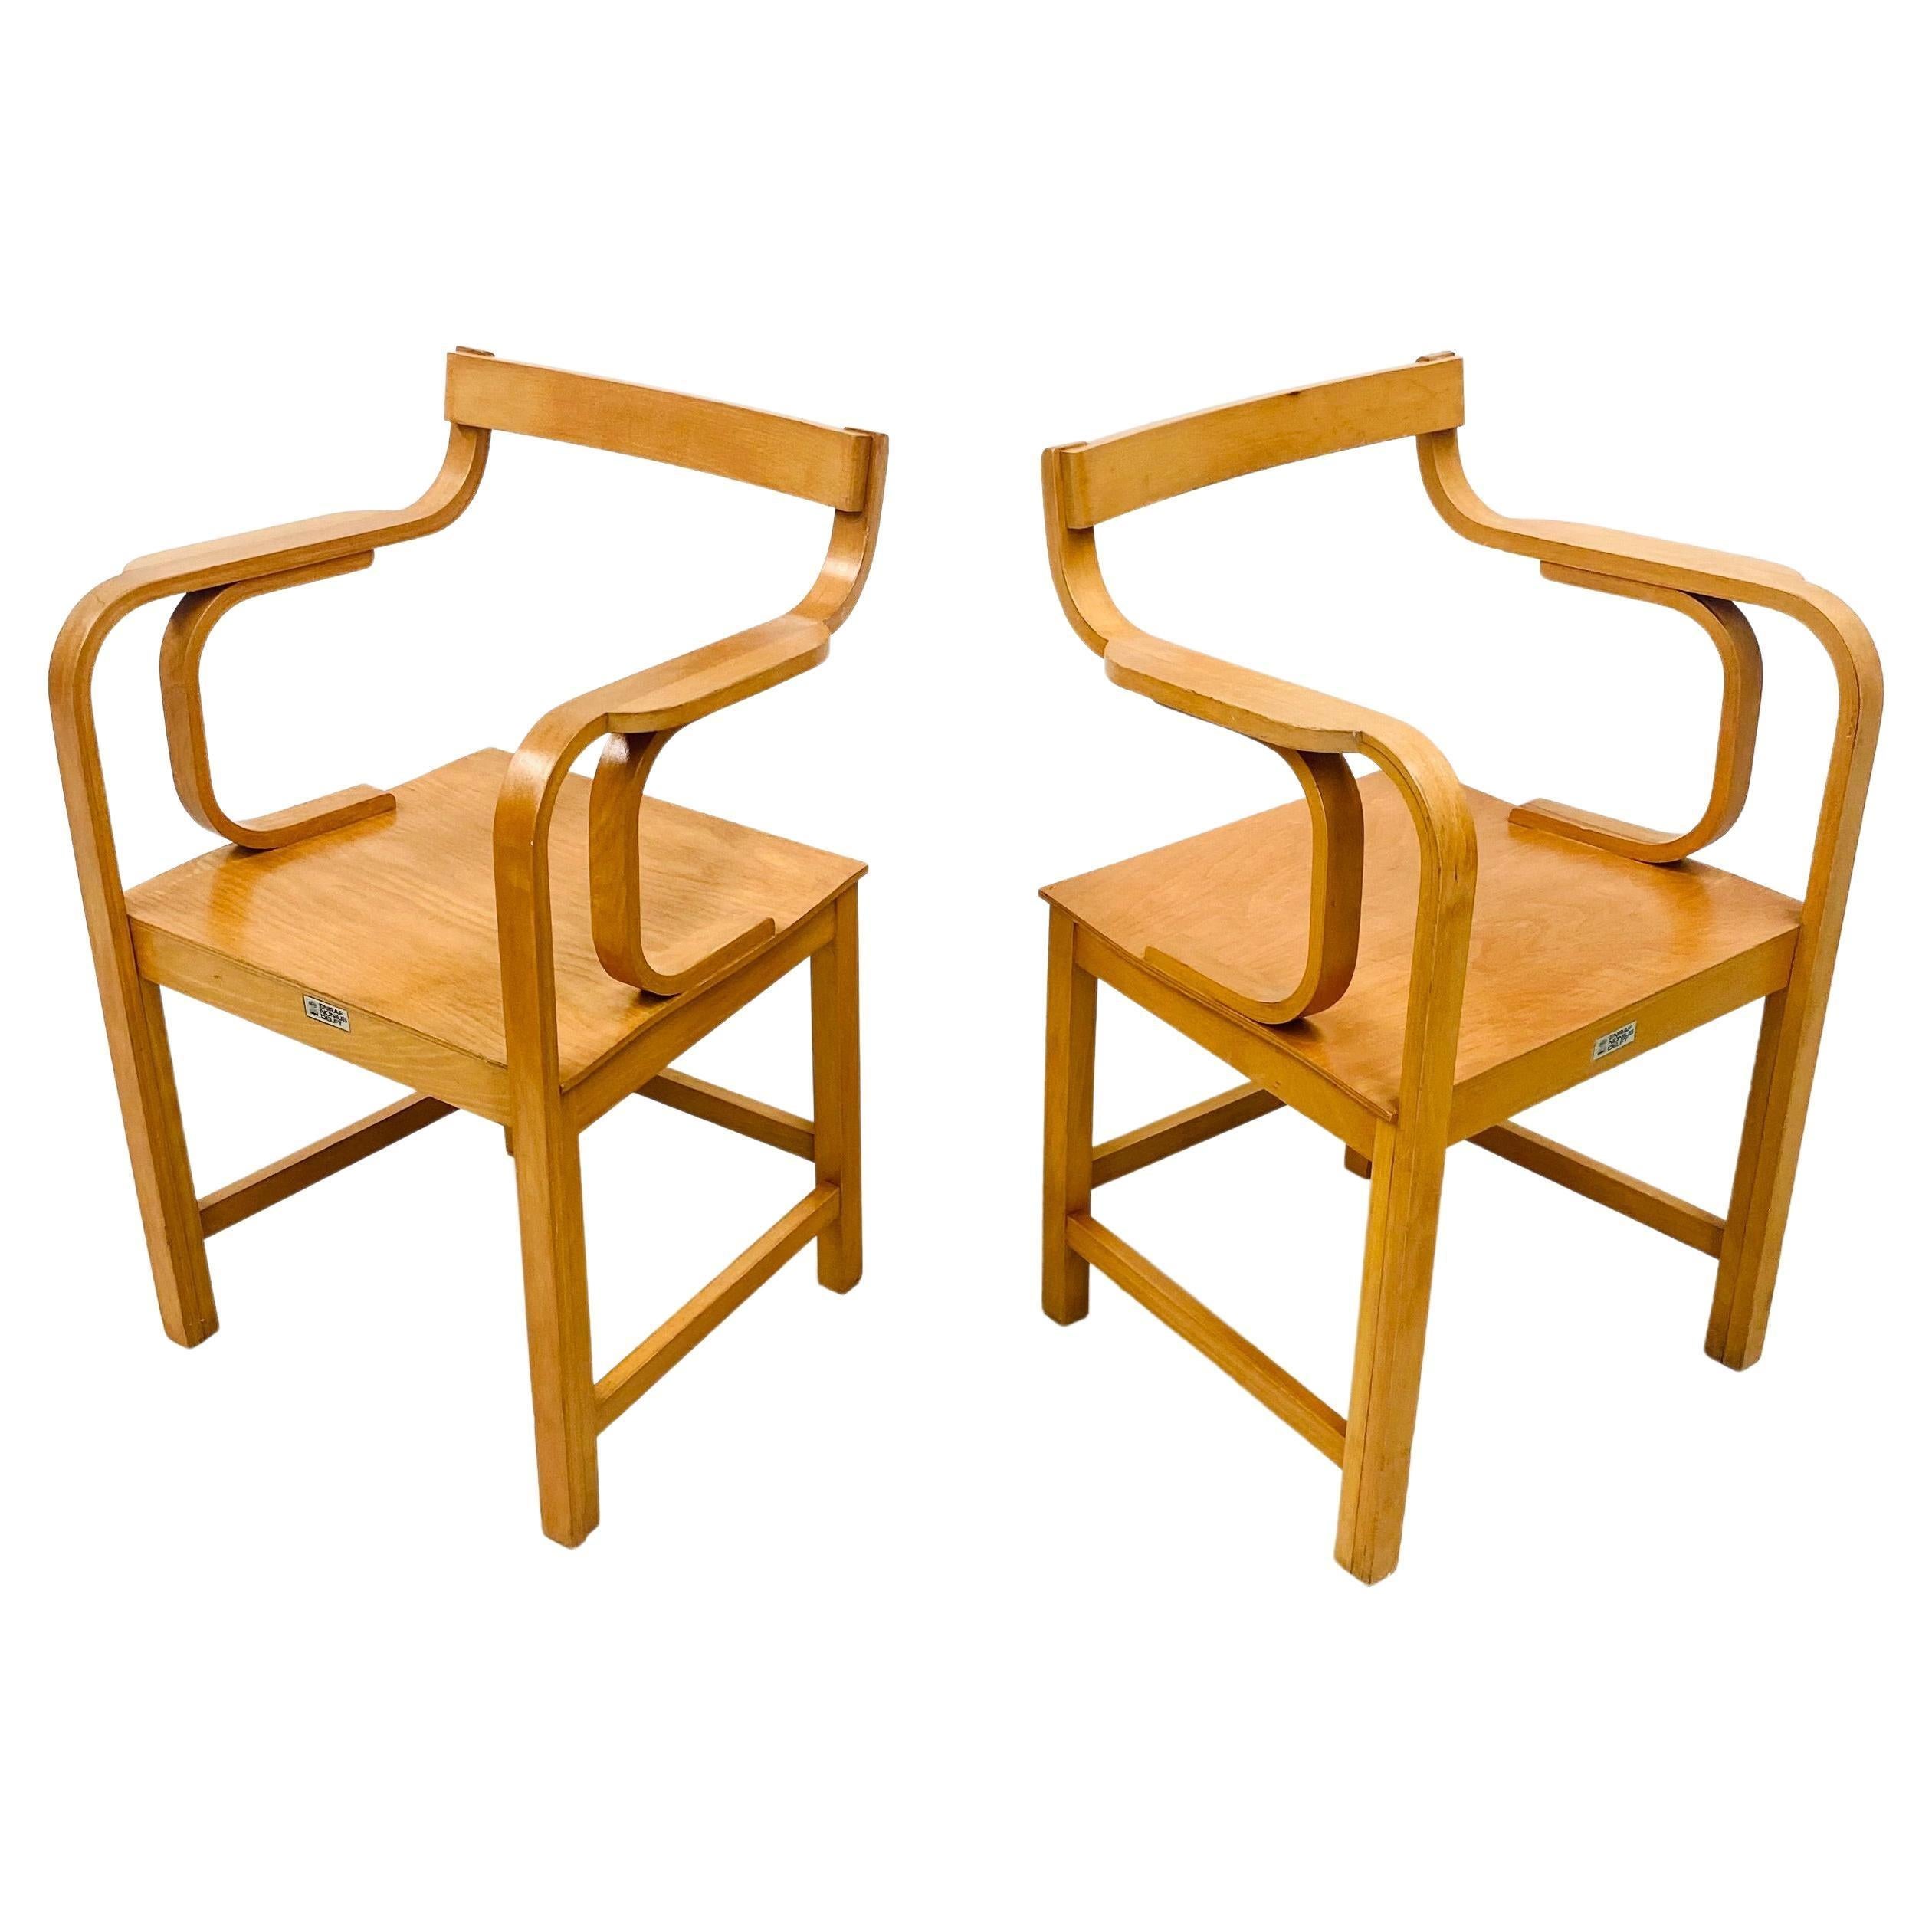 20th Century Vintage Dutch Plywood Beech Armchairs by Enraf Nonius Delft, 1970s For Sale